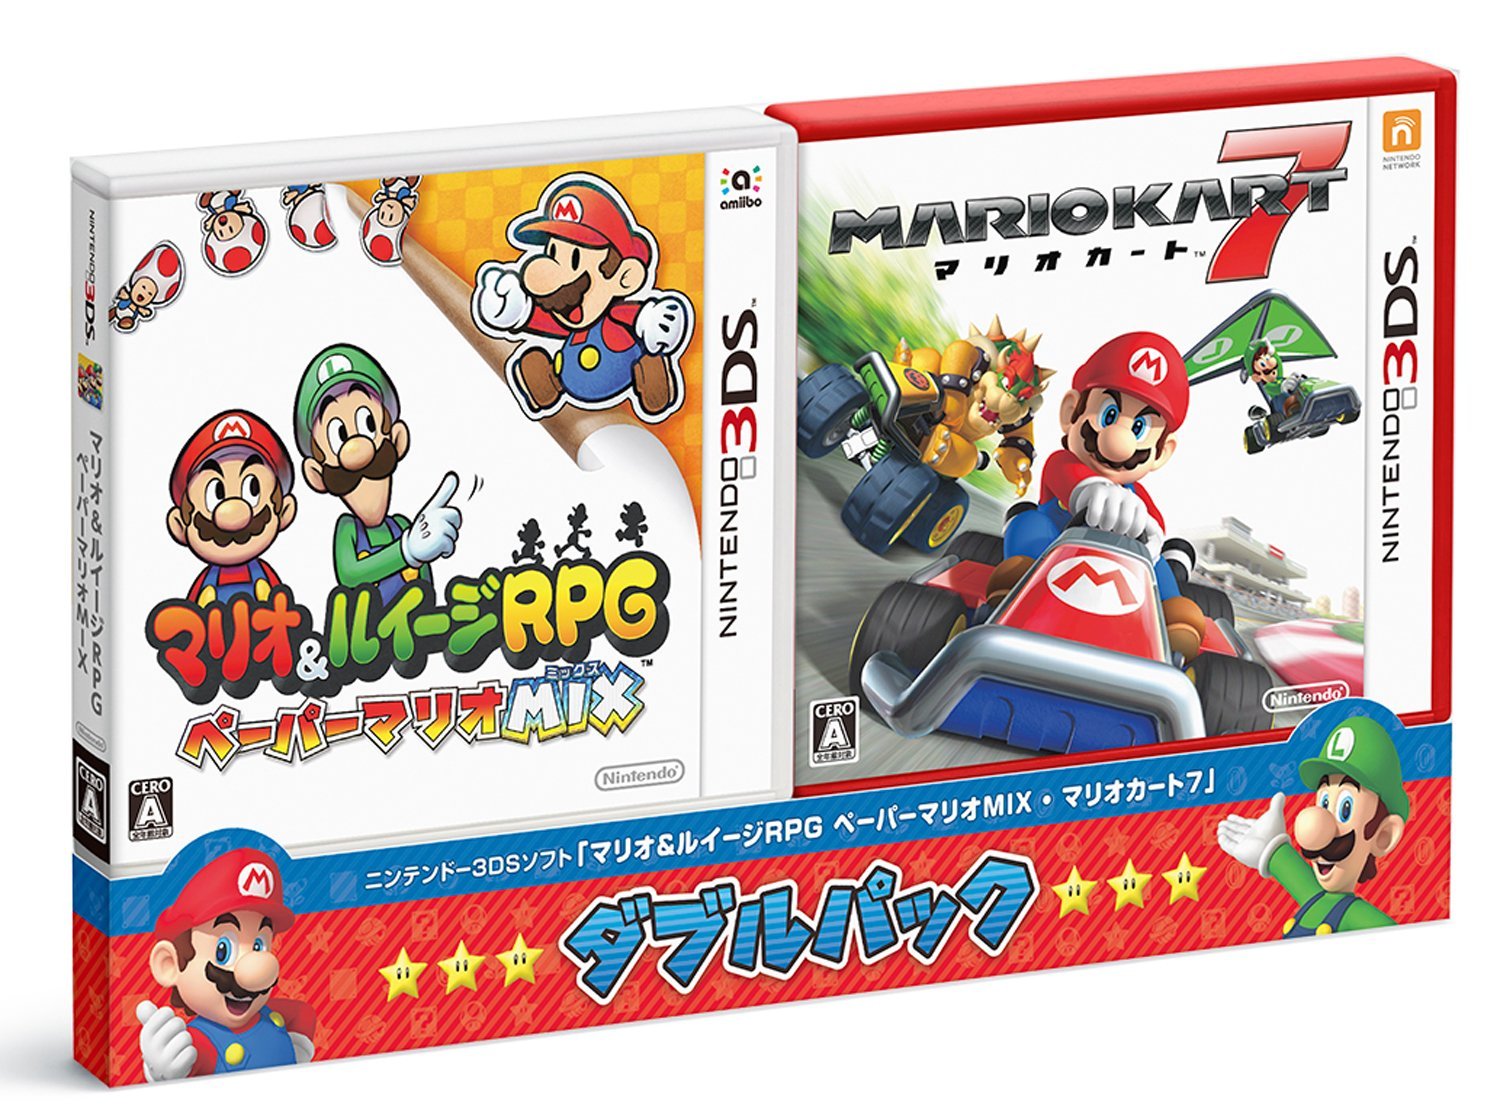 http://www.perfectly-nintendo.com/wp-content/gallery/japan-boxart-14-11-2015/9.jpg